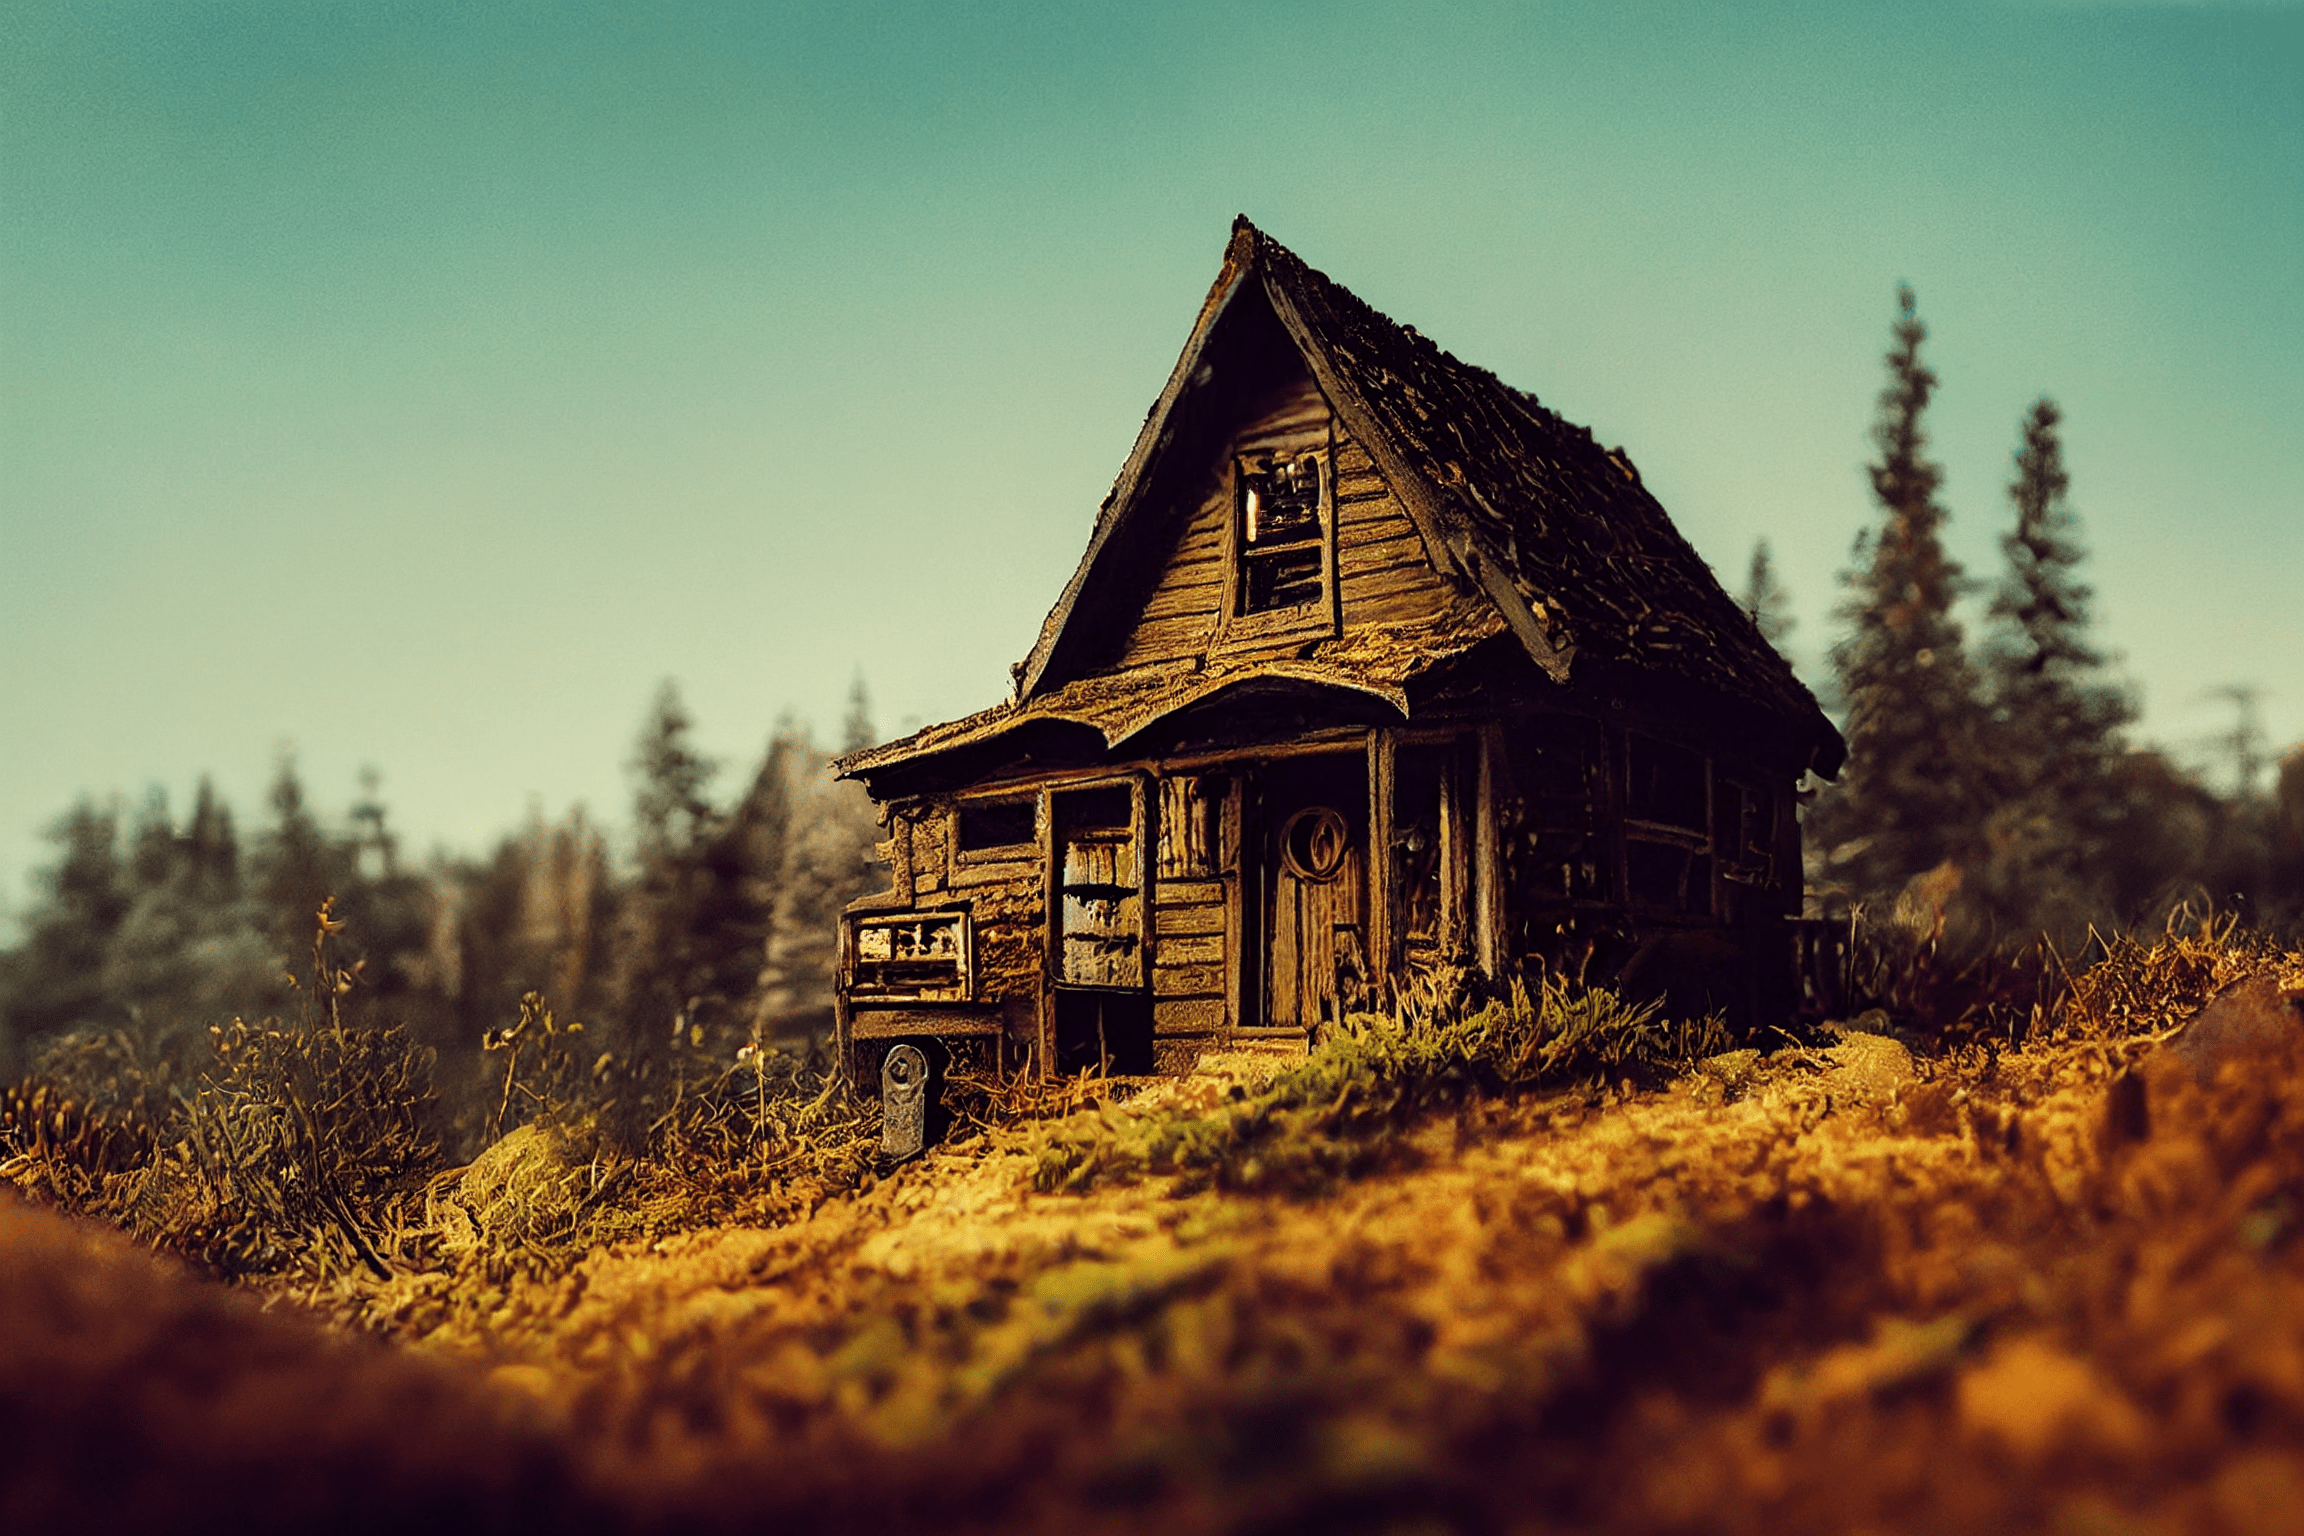 Way back a year ago – Cabincore miniature cabin on a hill